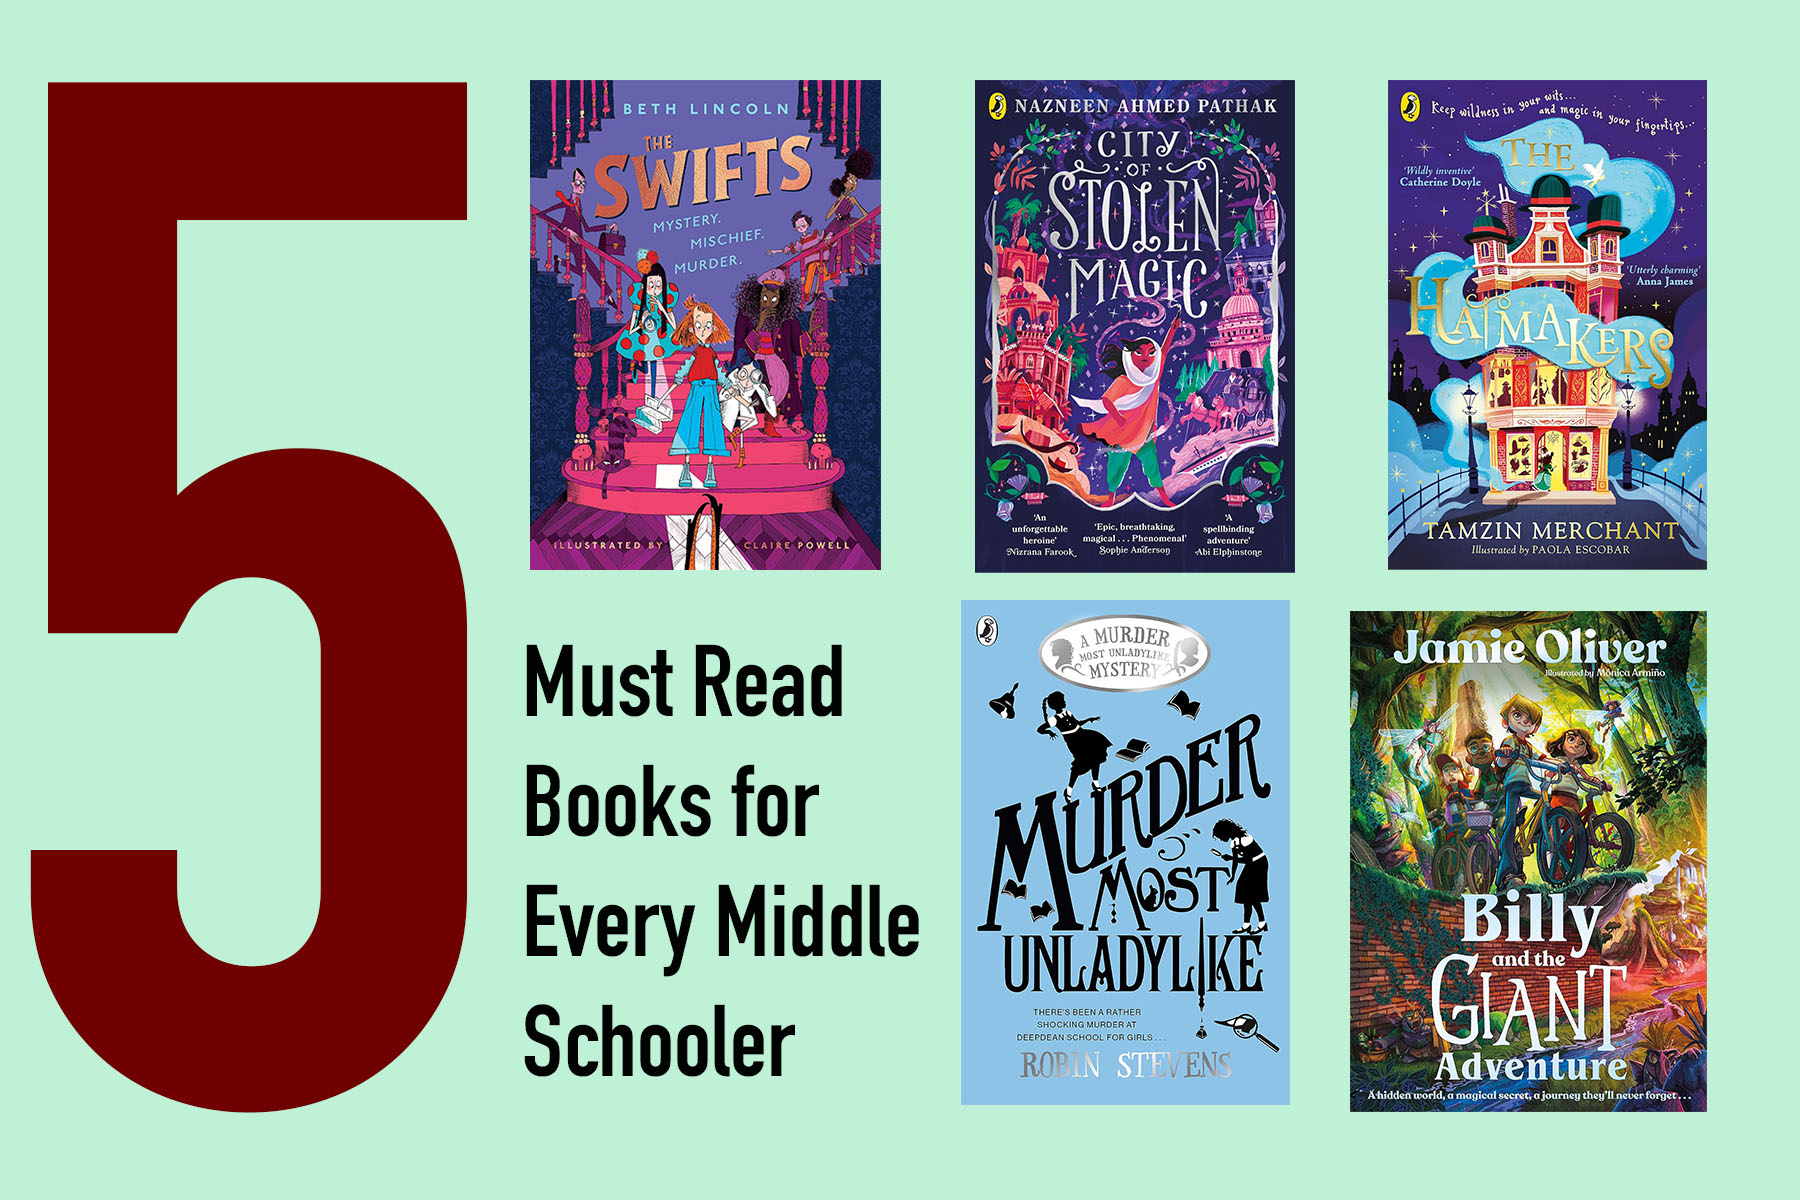 5 Must Read Adventure Books for Middle Schoolers